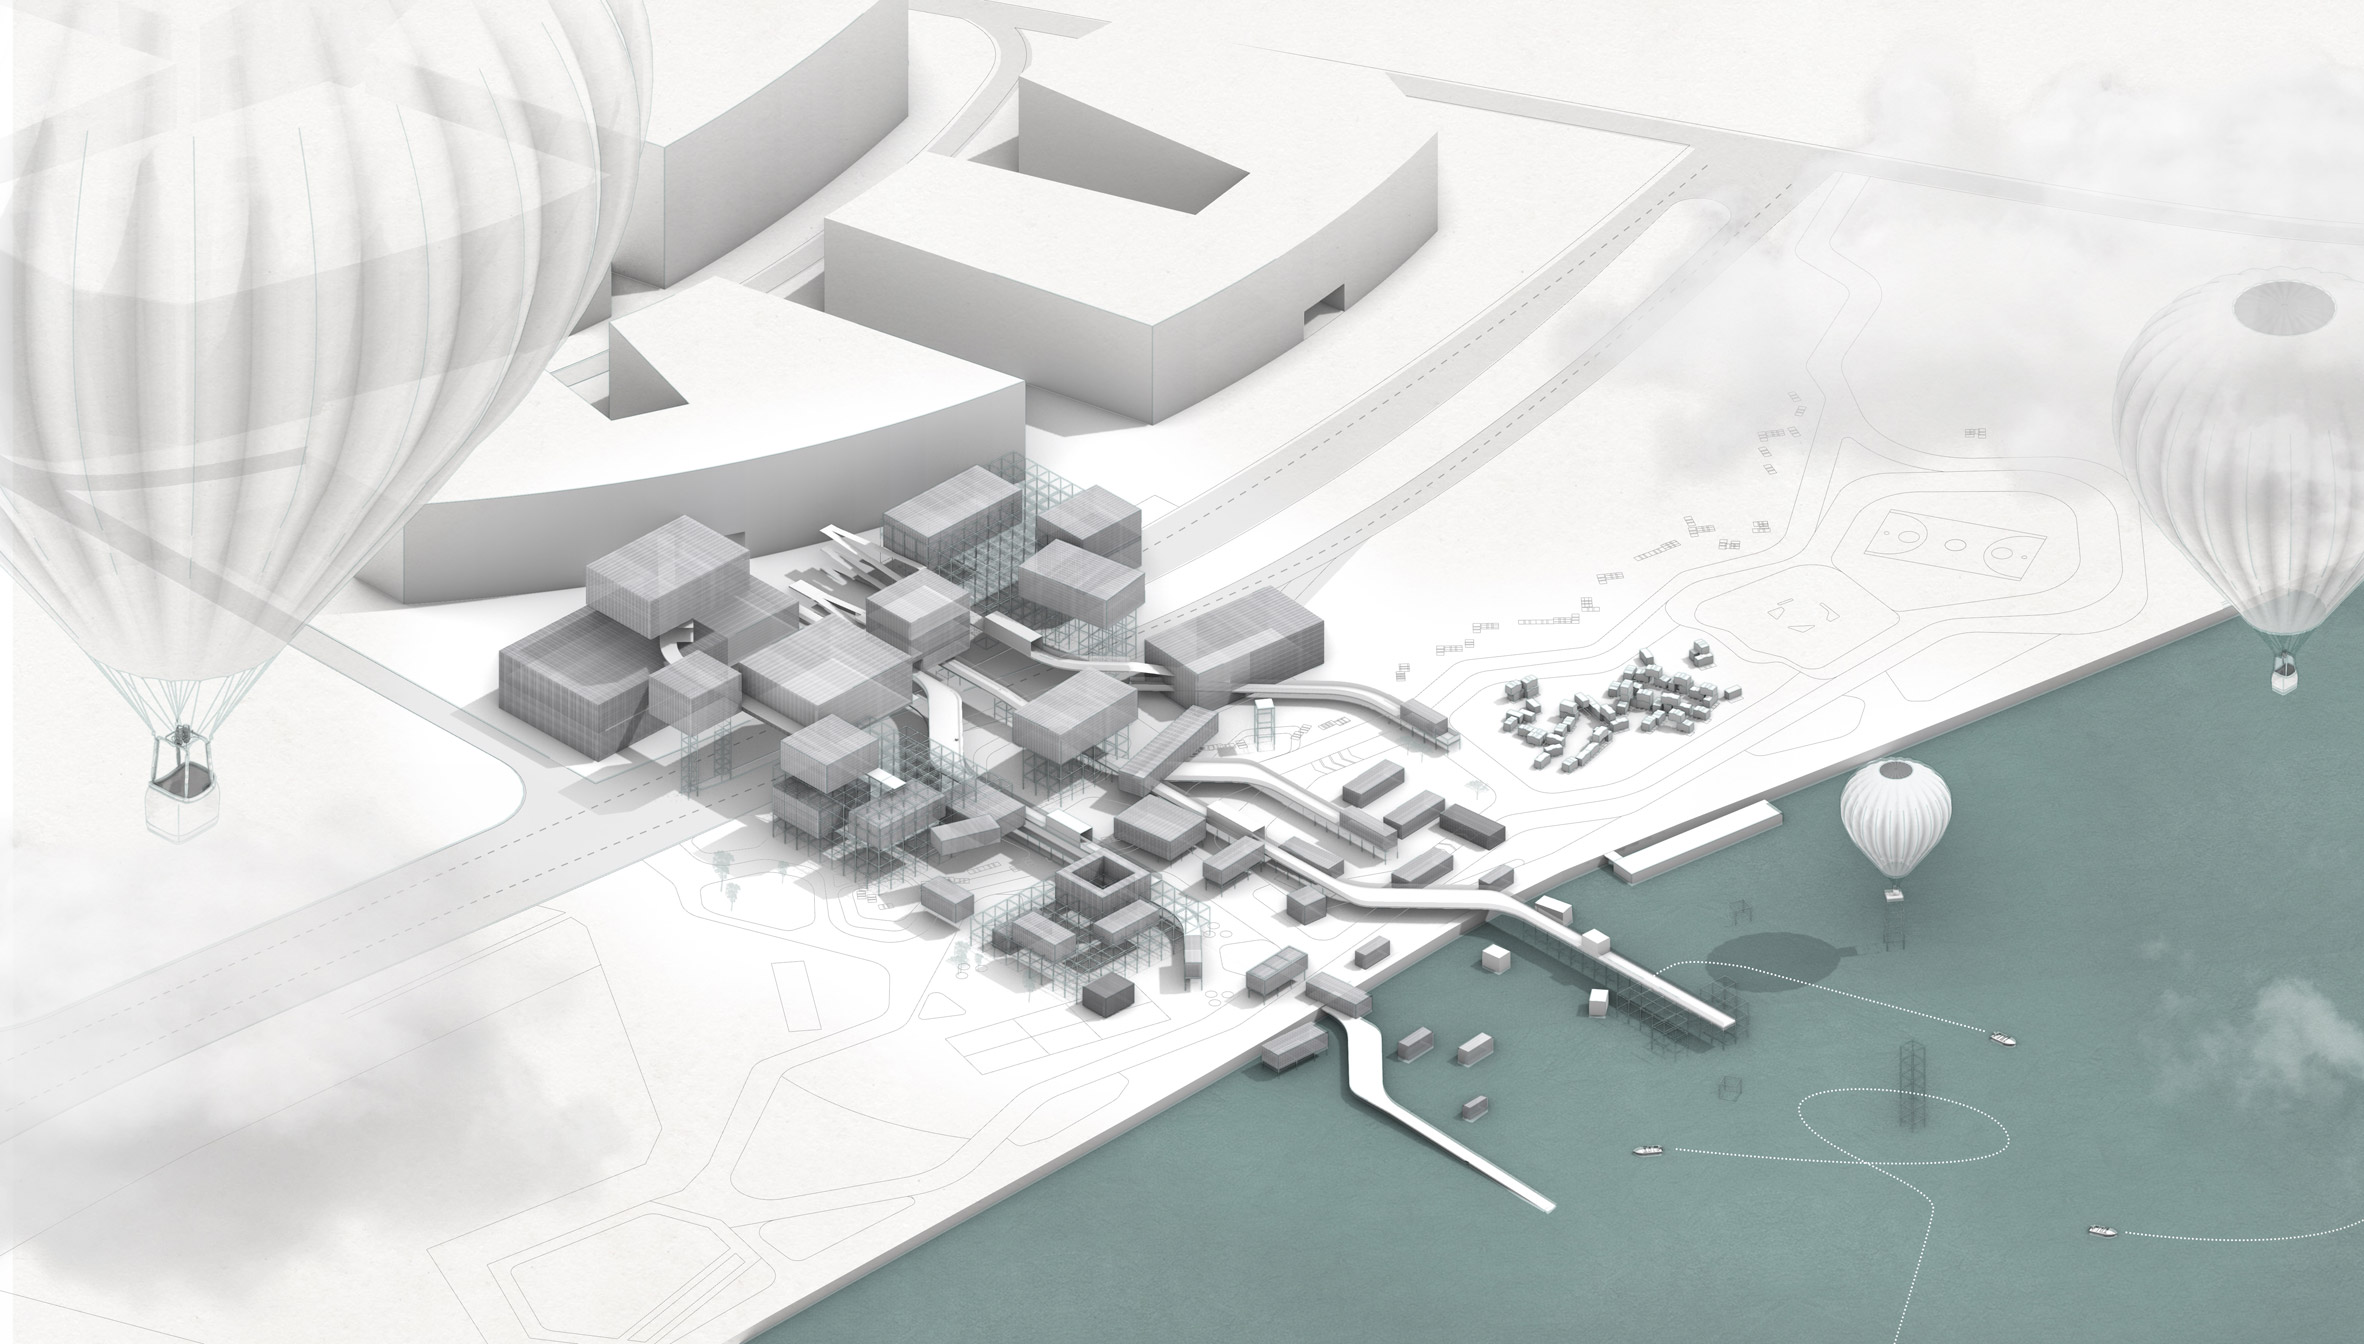 Isometric render of an architectural intervention by the sea with hot air balloons